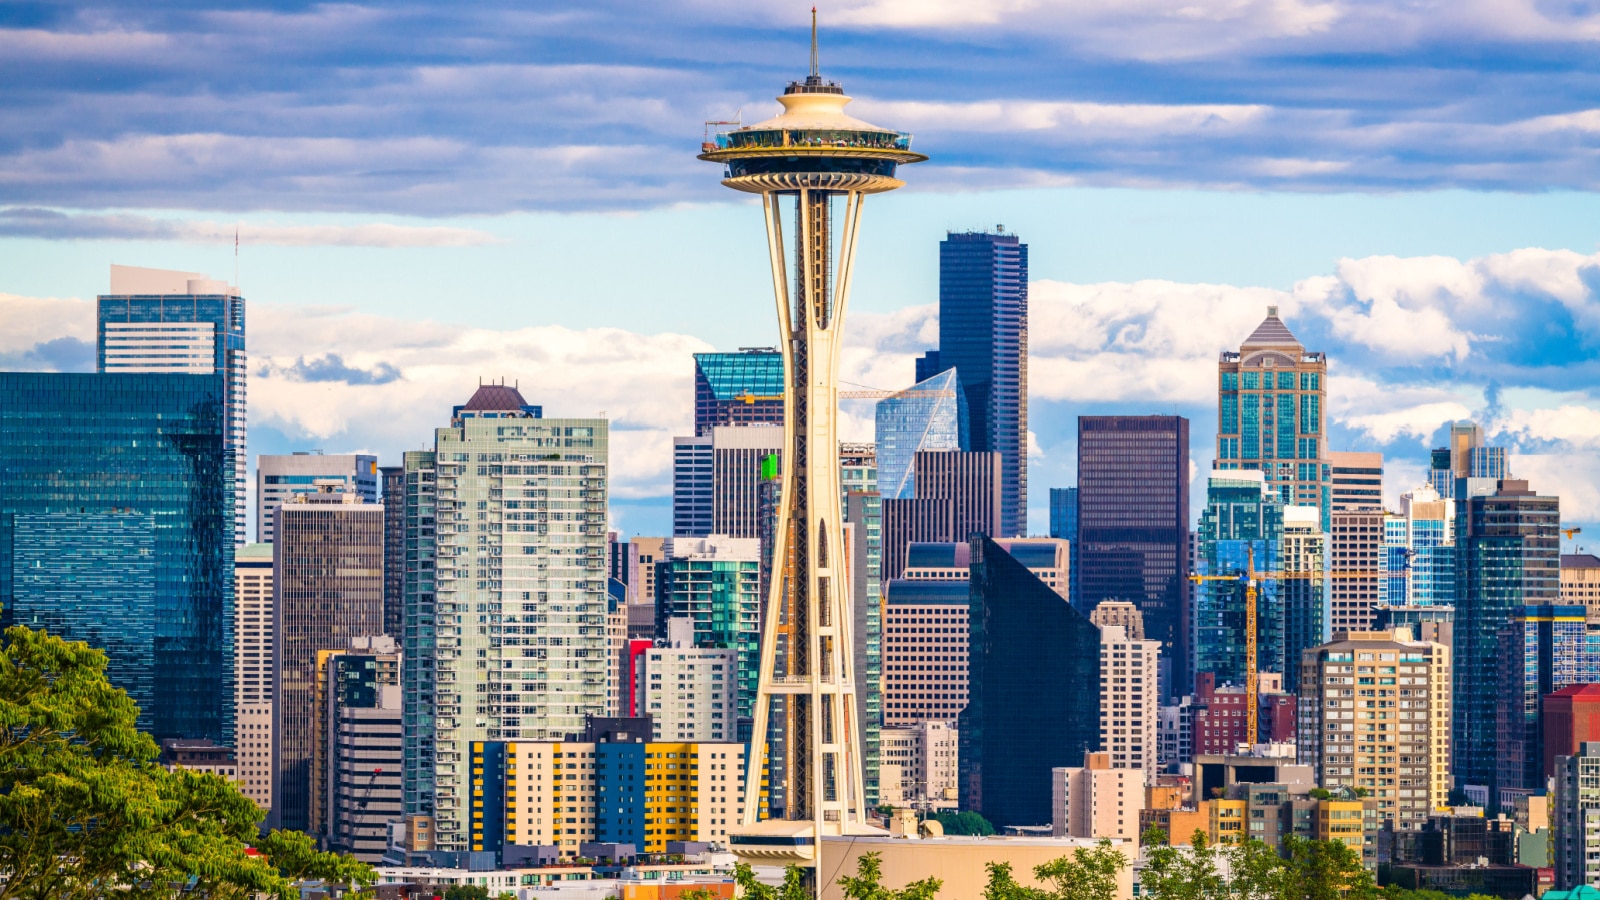 <p>With its stunning views of Puget Sound and the Olympic Mountains, Seattle is a city known for its natural beauty and vibrant culture.</p>